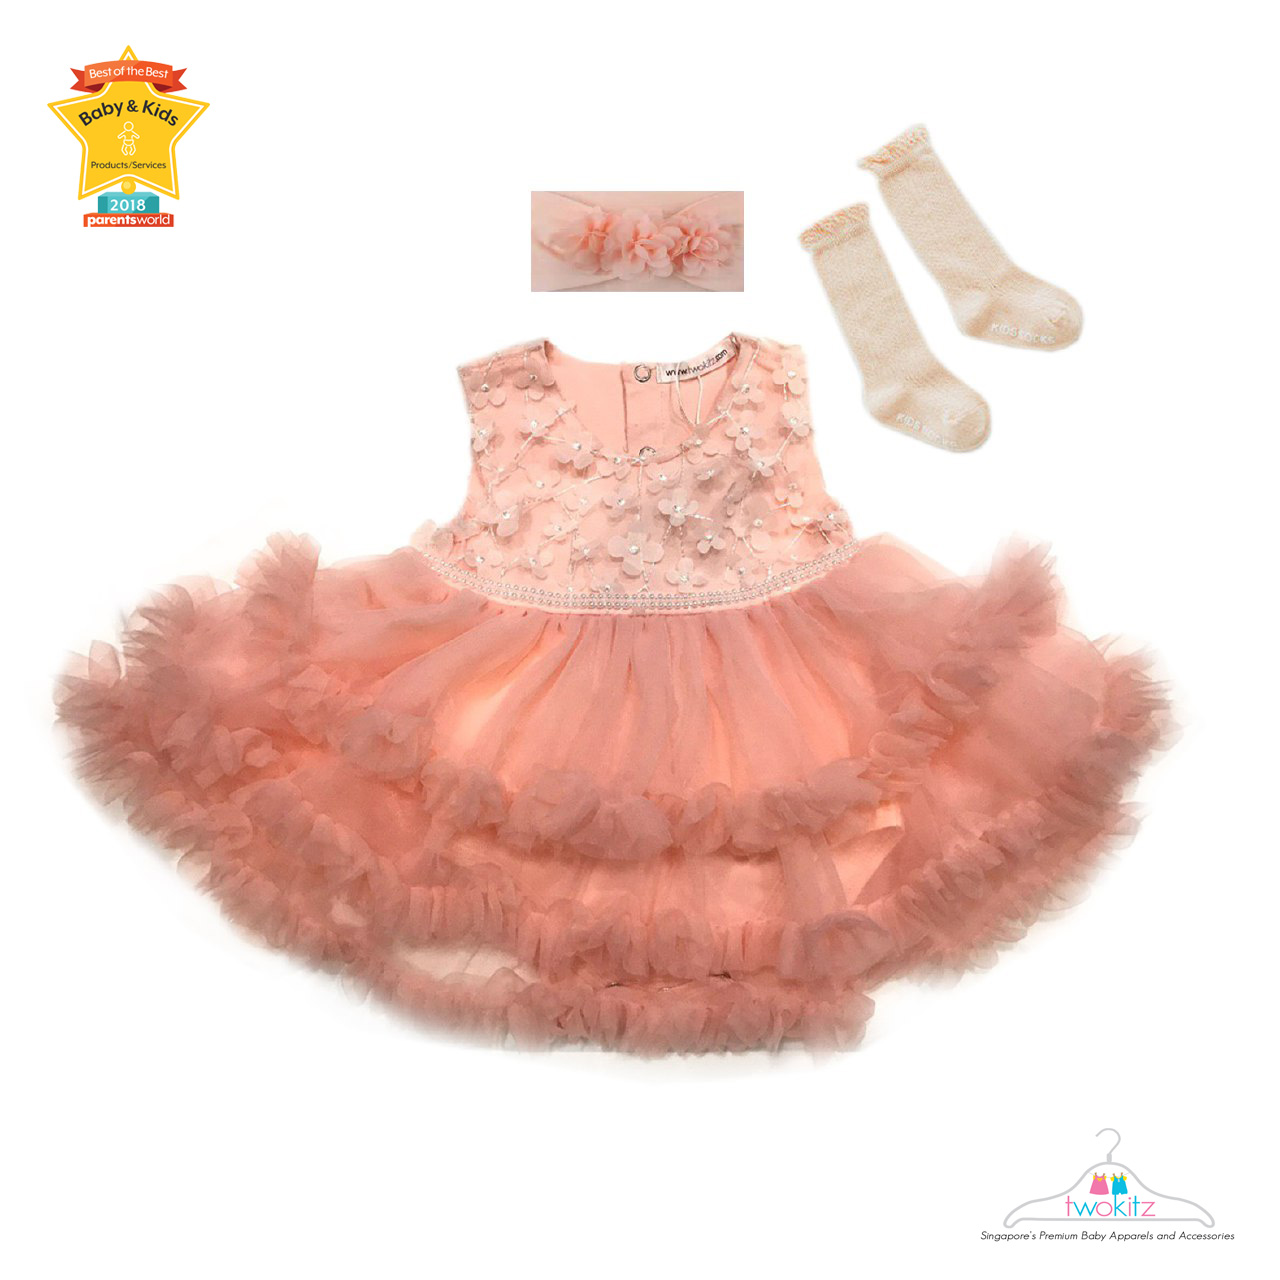 Twokitz Coral Floral Pearl Fluffy Romper Dress + Free Headband and a pair of socks